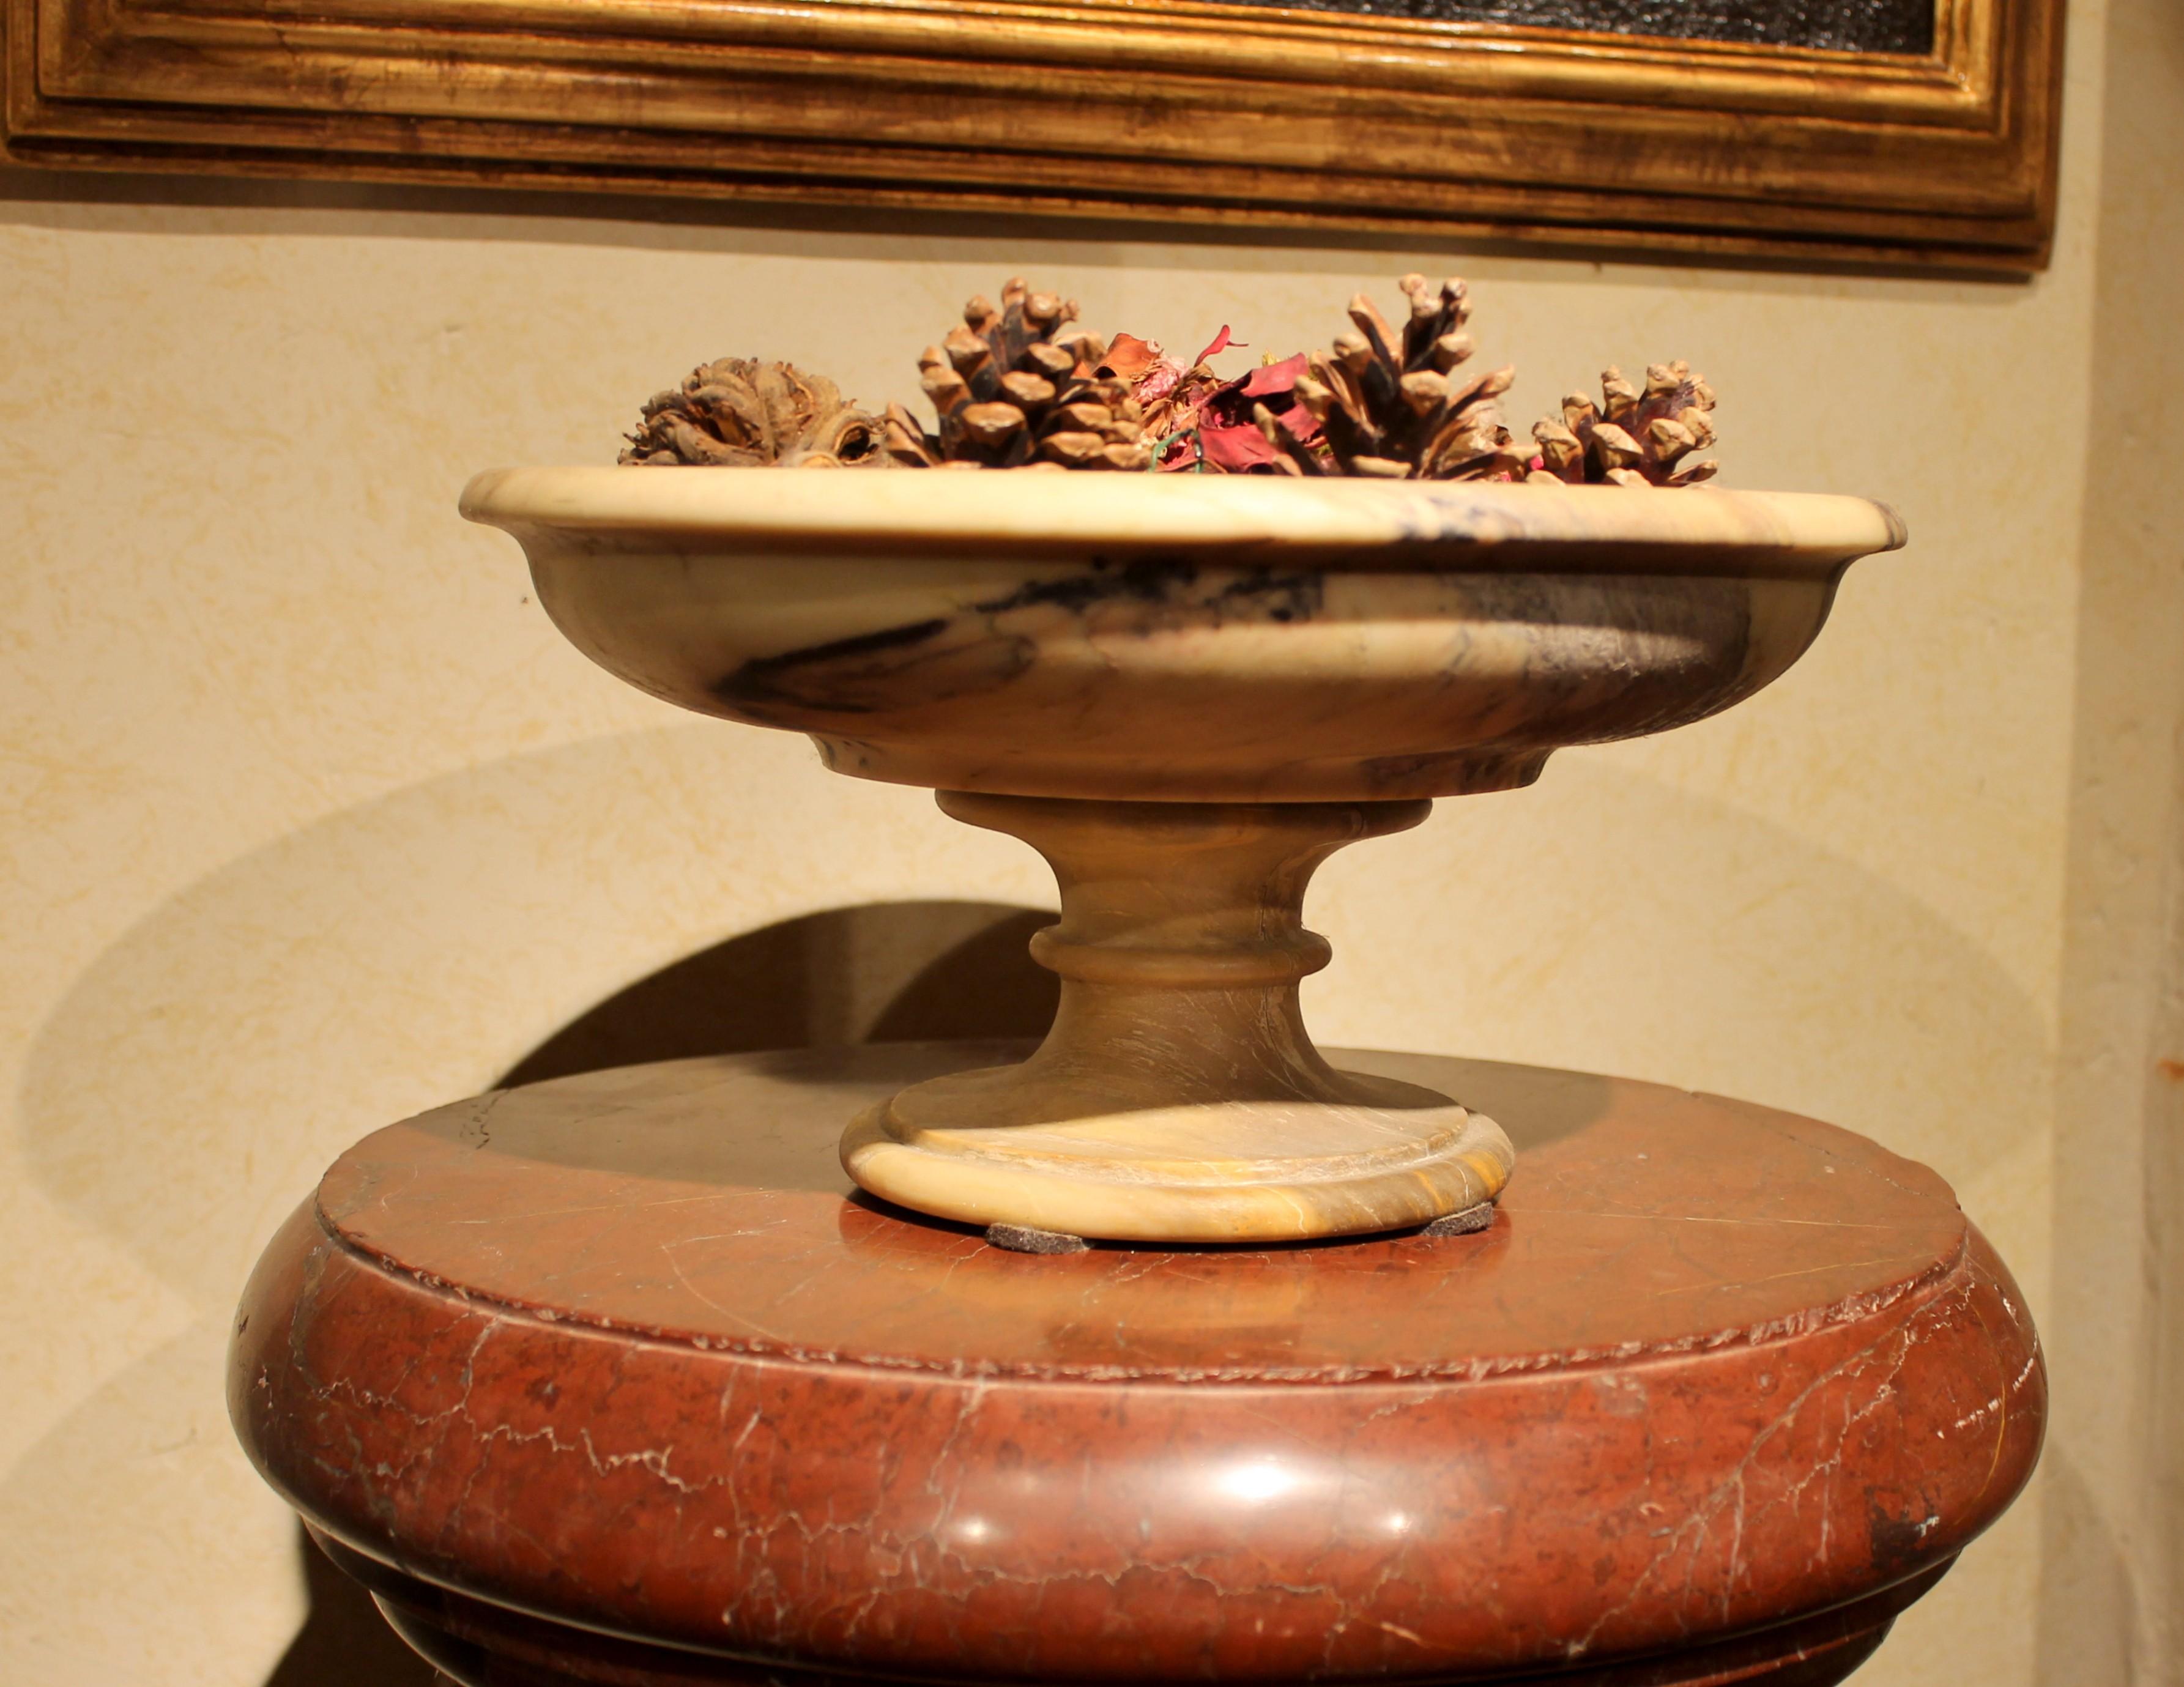 This Italian 19th century ( 1810- 1860 circa) antique neoclassical marble tazza or bowl on pedestal features round lines finished with a rolled edge both on top and on socle. This highly decorative piece displaying an eye-catching flamed Cipollino